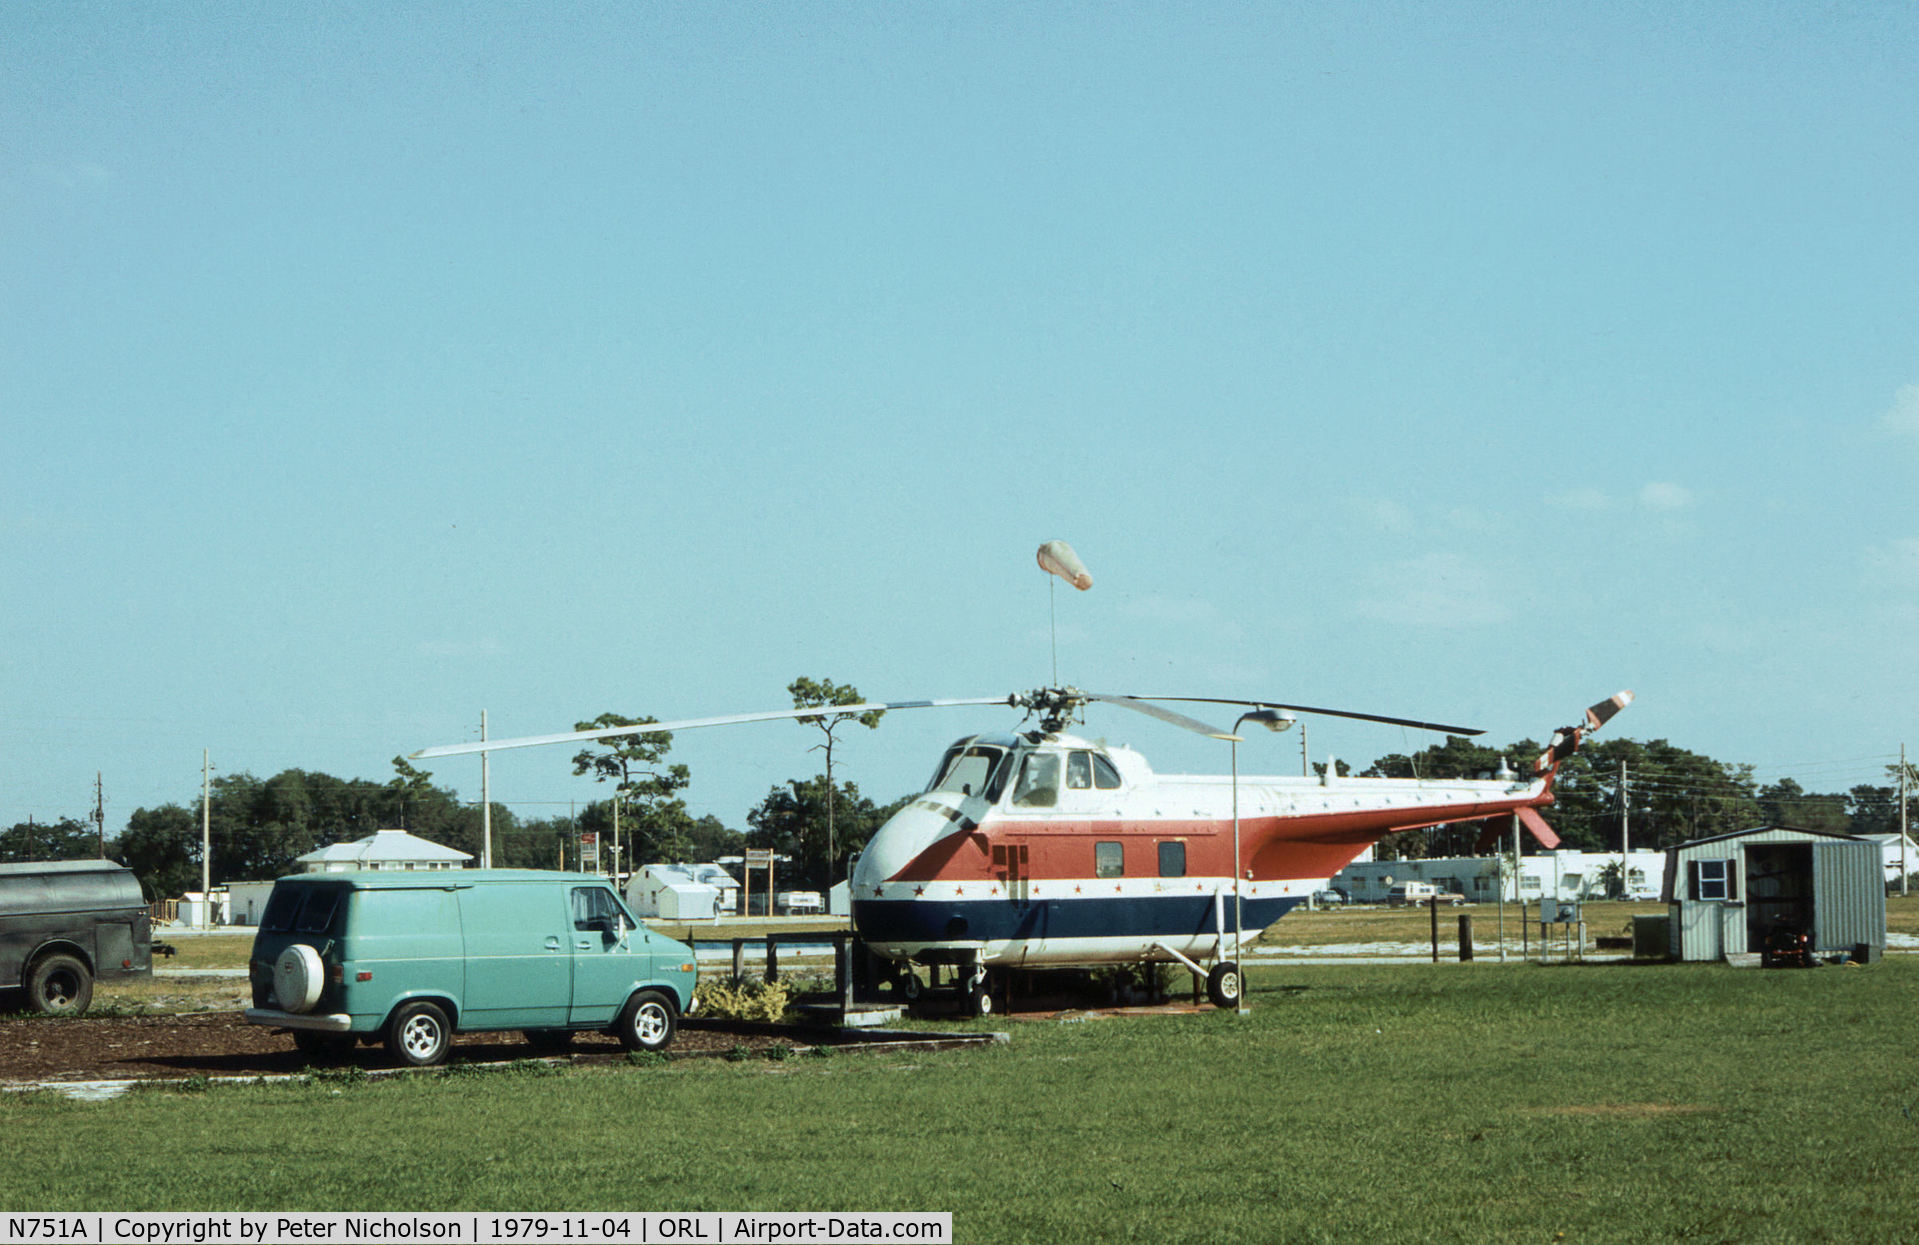 N751A, Sikorsky S-55 C/N 55-912, S-55 of Centennial Helicopters as seen at Herndon in November 1979.